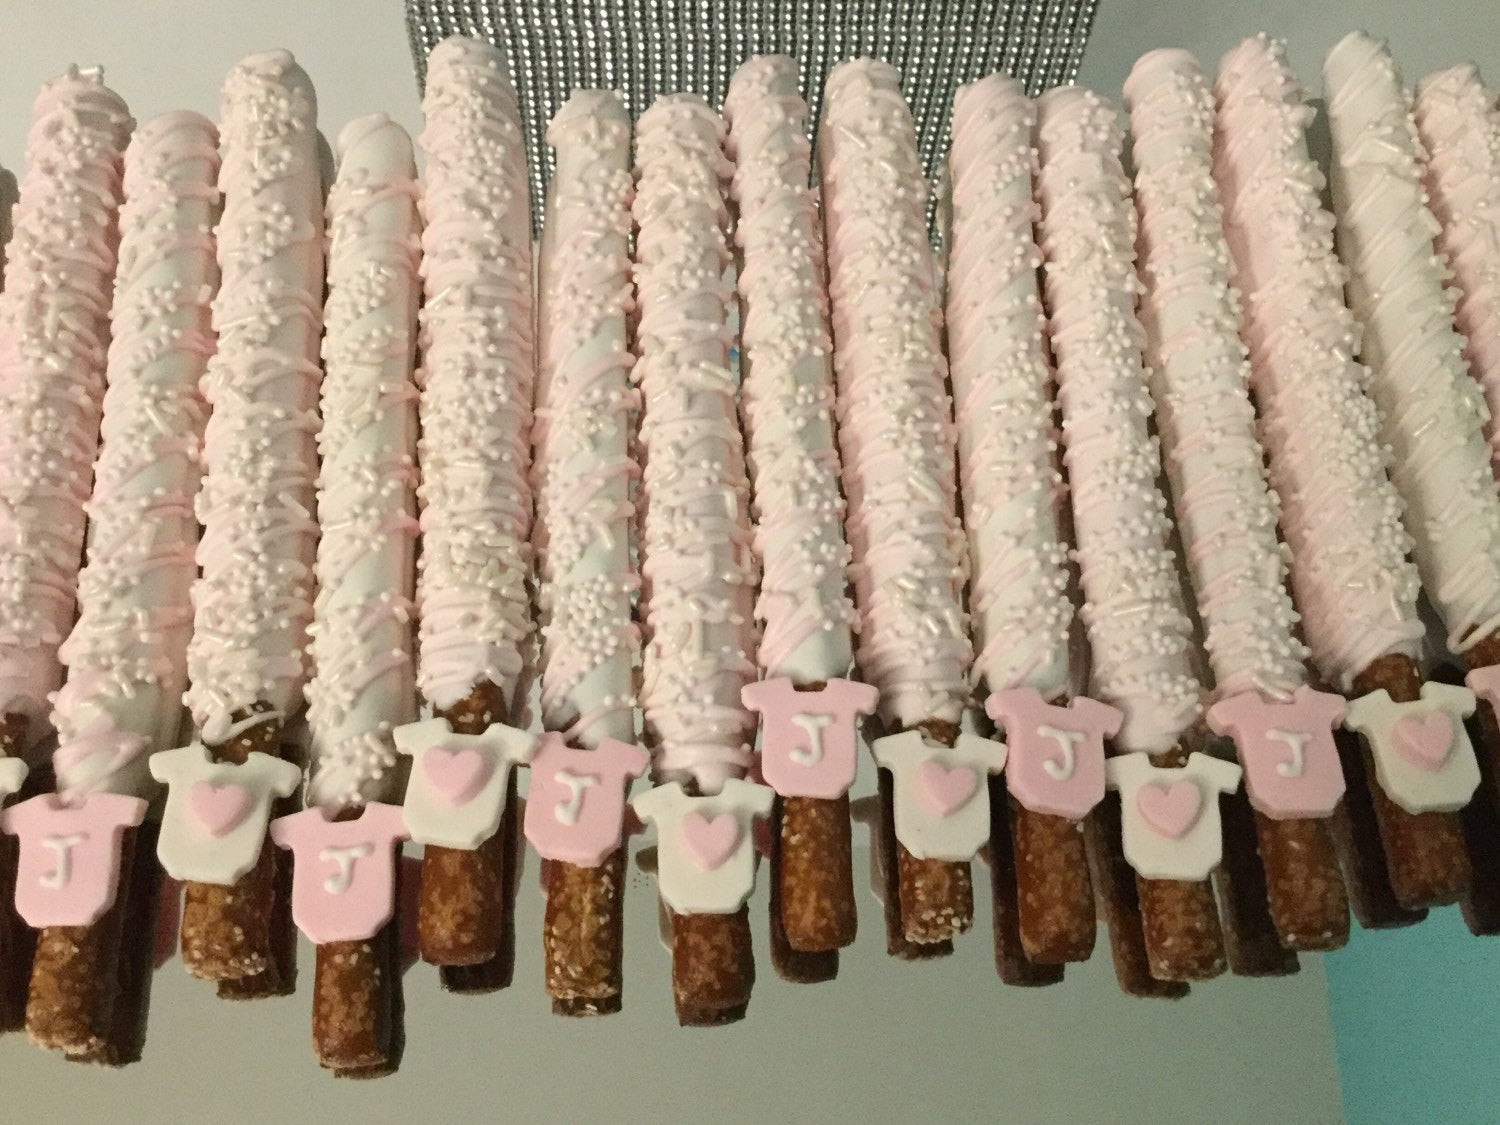 Chocolate Covered Pretzels For Baby Shower
 Baby Shower Chocolate Covered Pretzels